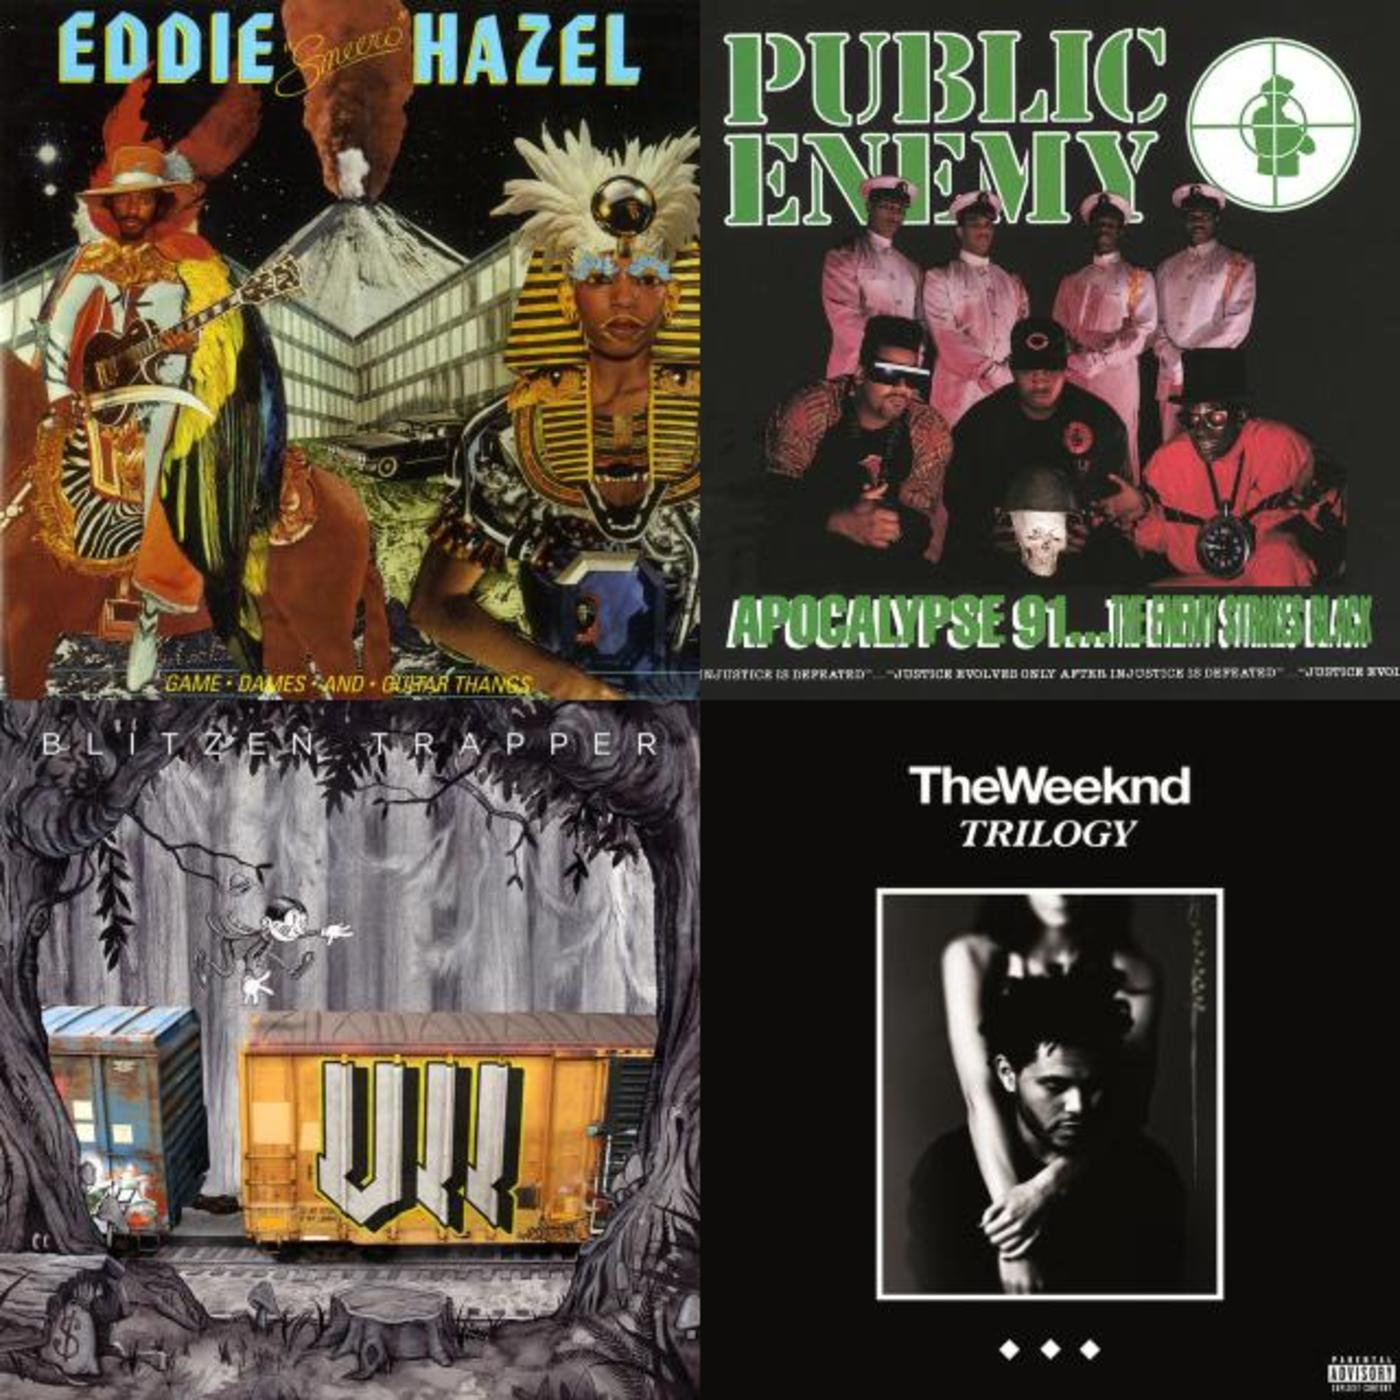 A Tour Through The 50 States - Eddie Hazel, Public Enemy, The Weeknd, Blitzen Trapper, Mirah, Built To Spill, Youth Lagoon, Water Liars, Bee Gees, Chris Knight, Tom Waits, Bon Iver